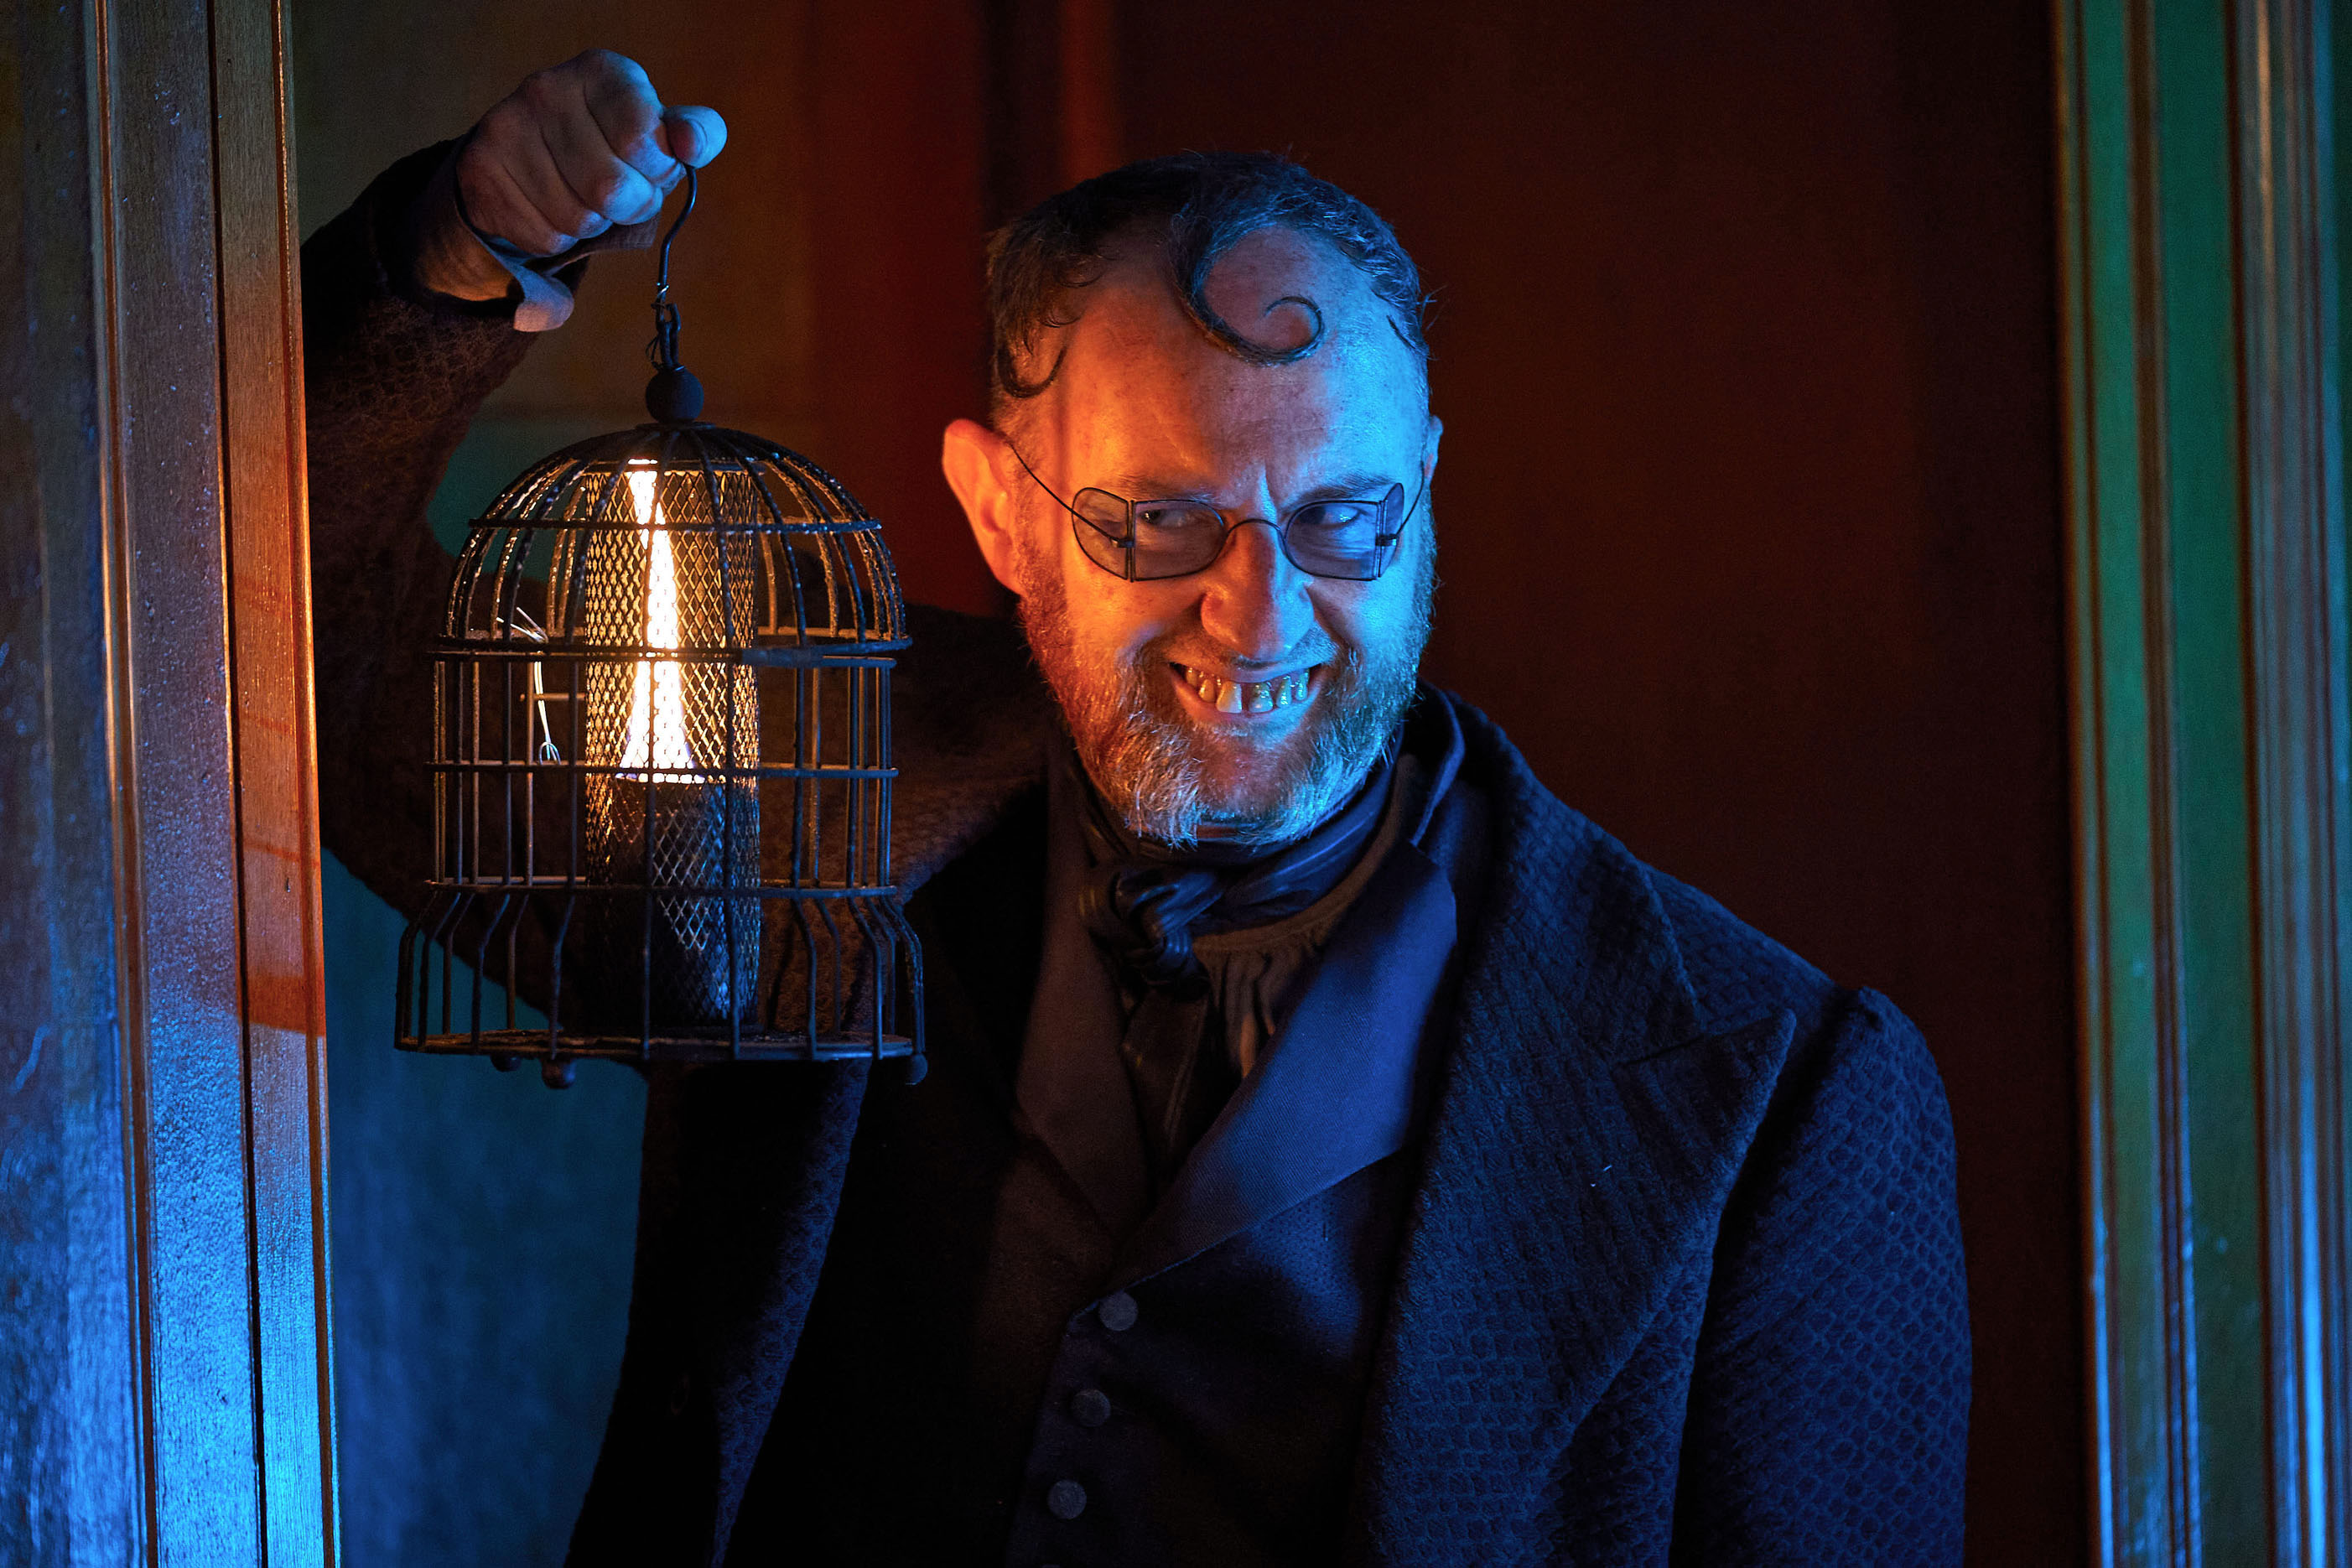 Mr Wickens (Mark Gatiss) appears in a doorway, bearing a candle aloft, a horrible smirk on his face and his yellow teeth on display